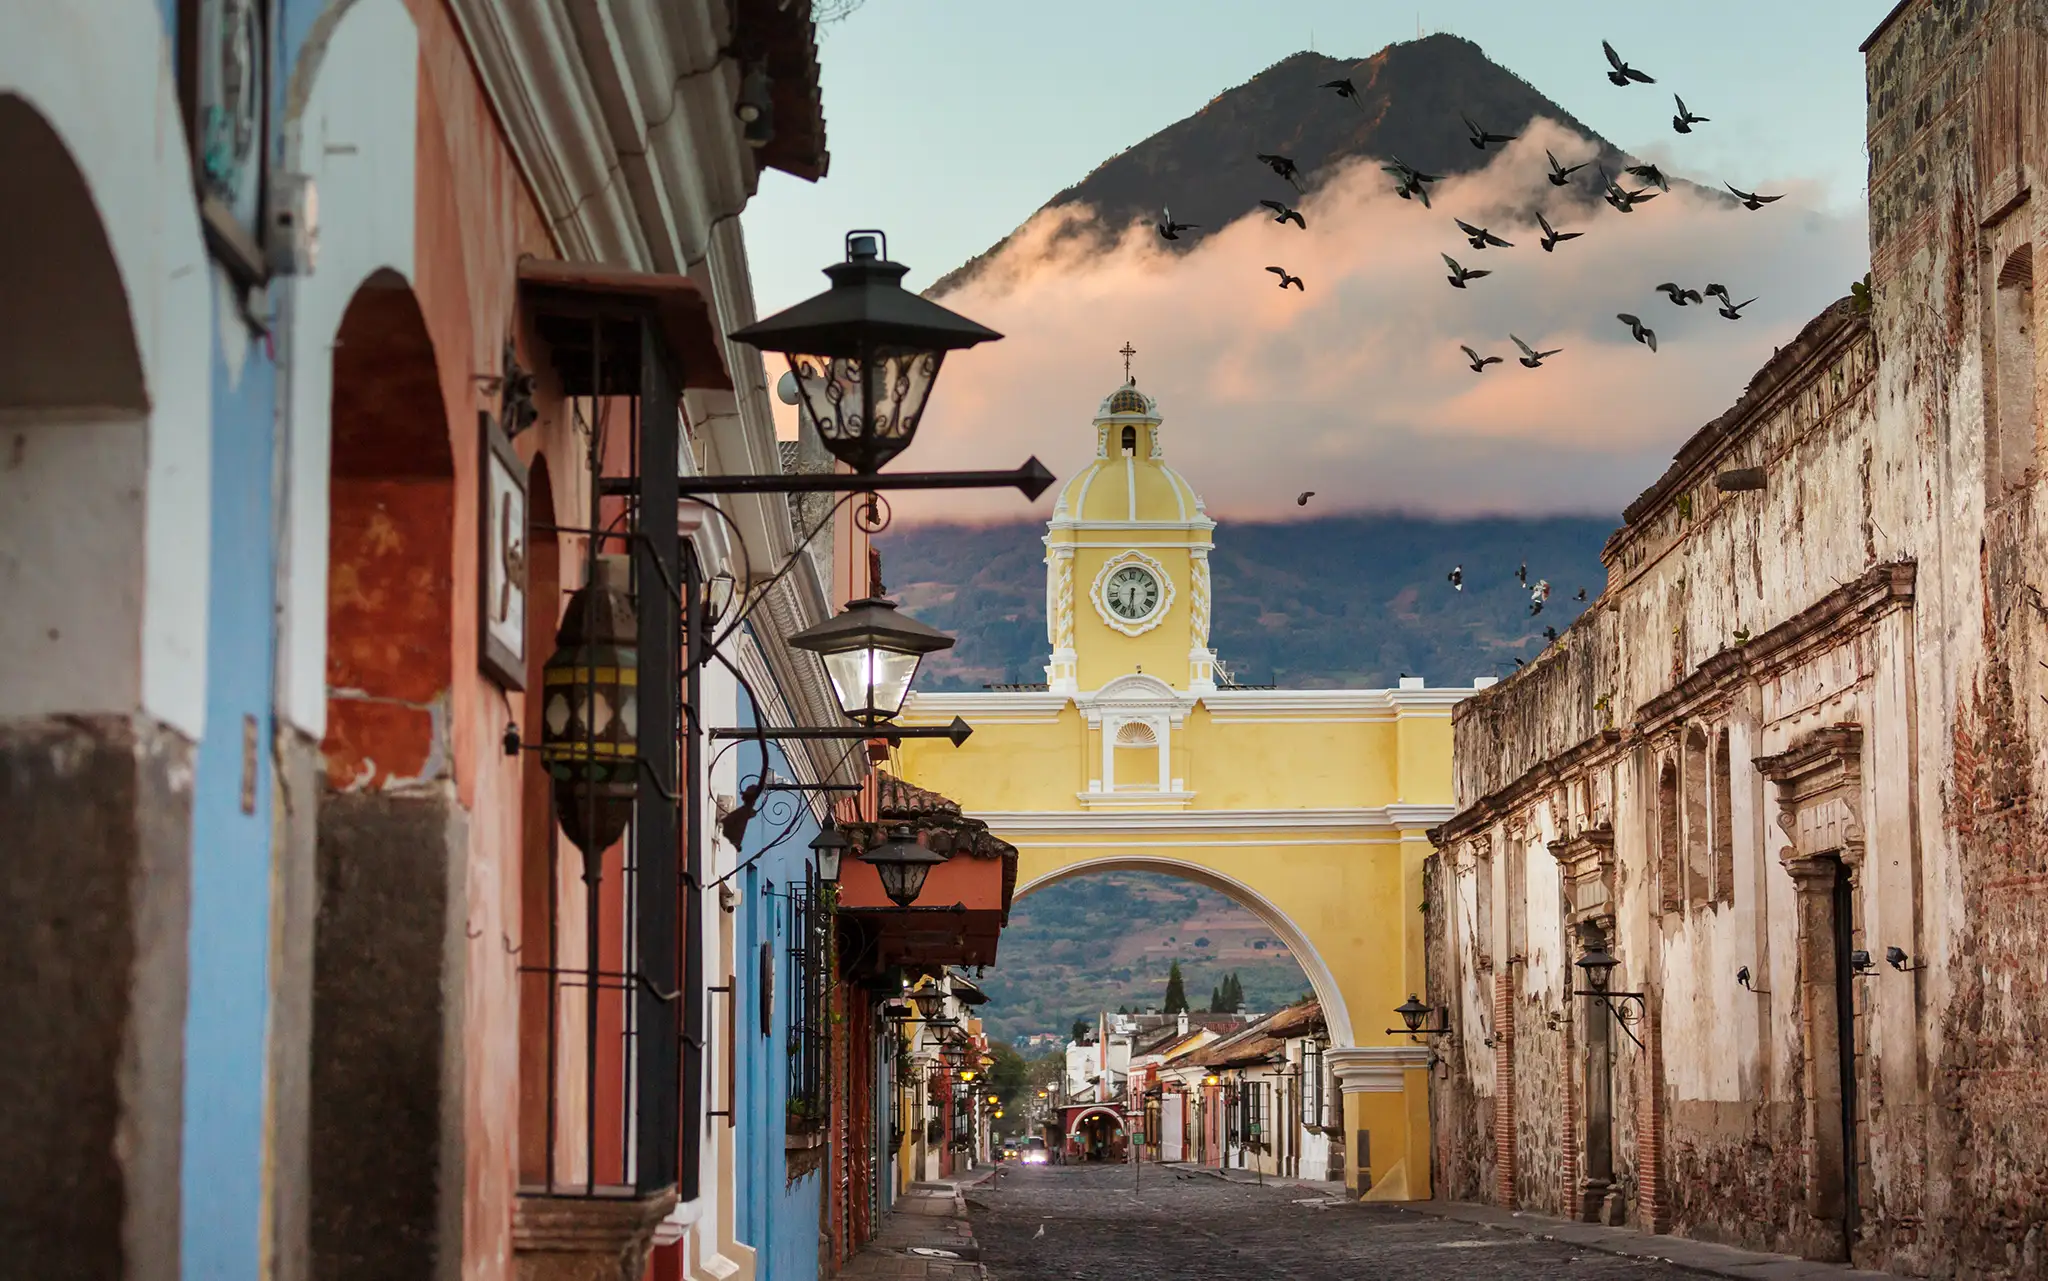 Cityscape of the main street and yellow Santa Catalina arch in the historic city center of Antigua at sunrise with the Agua volcano, Guatemala.